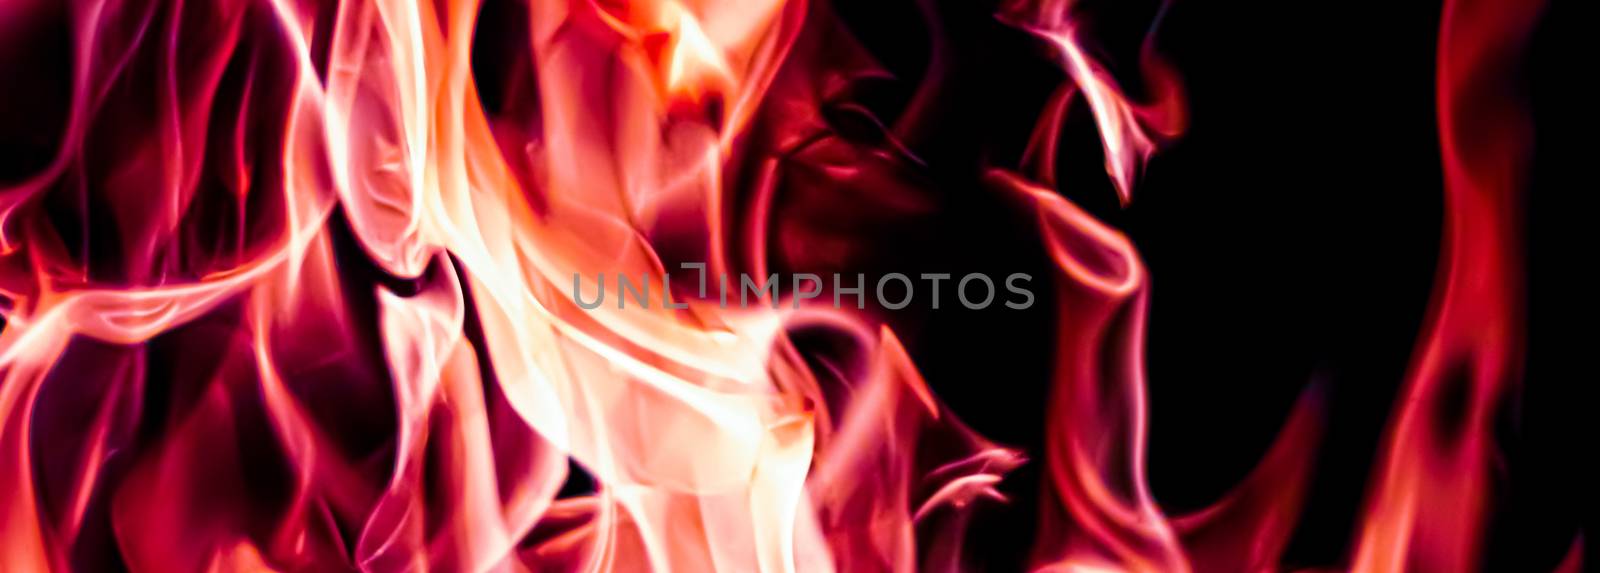 Red fire flames as nature element and abstract background by Anneleven